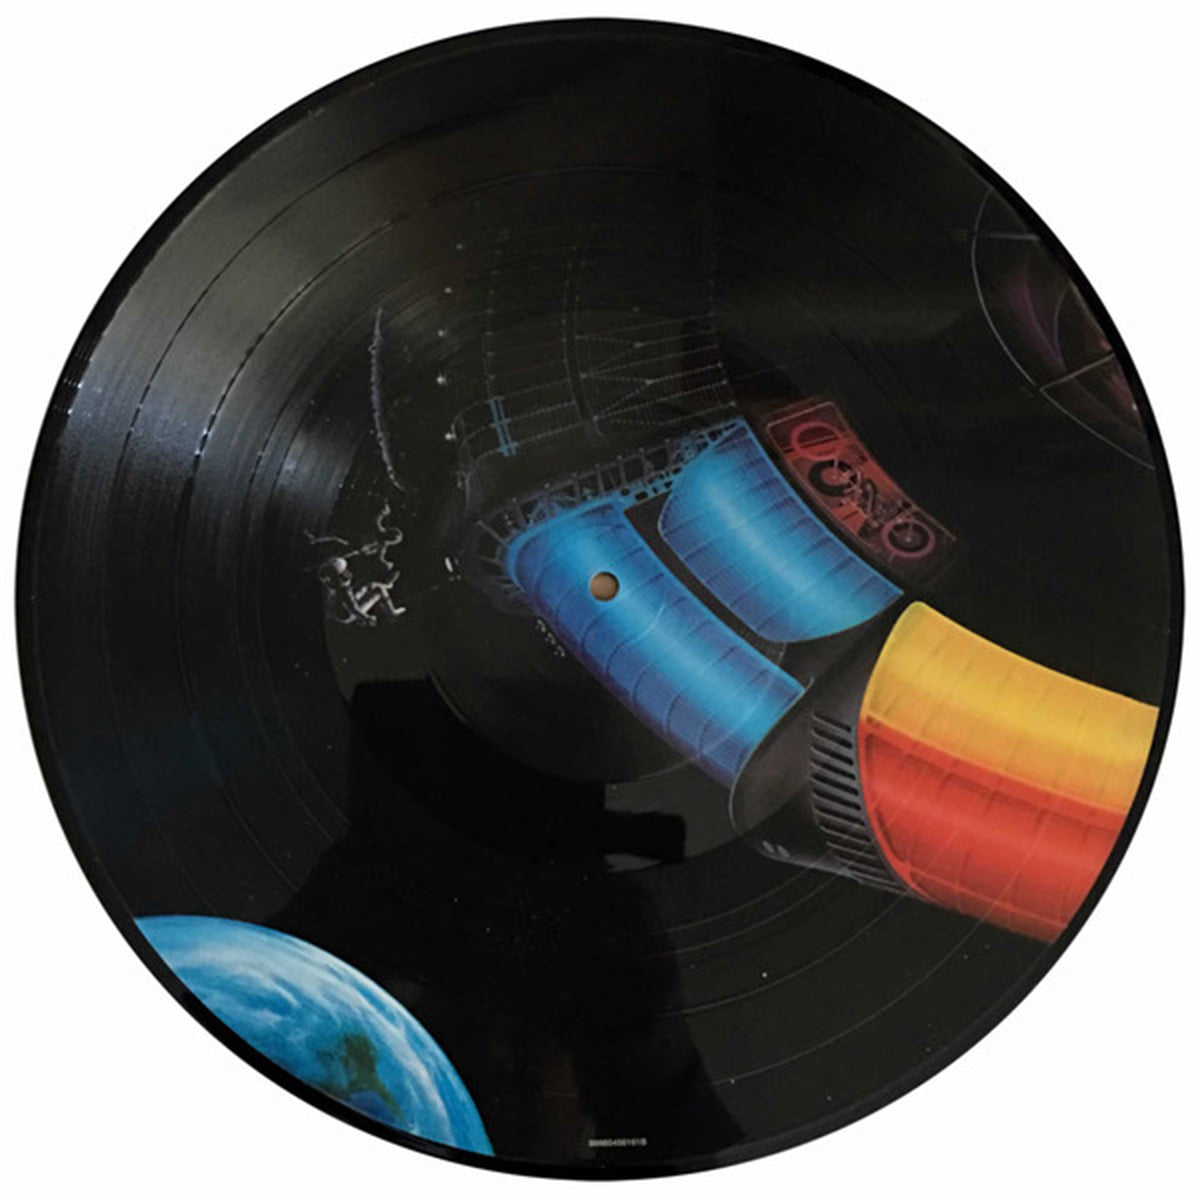 Electric Light Orchestra – Out Of The Blue - 2 Awesome Picture Discs!